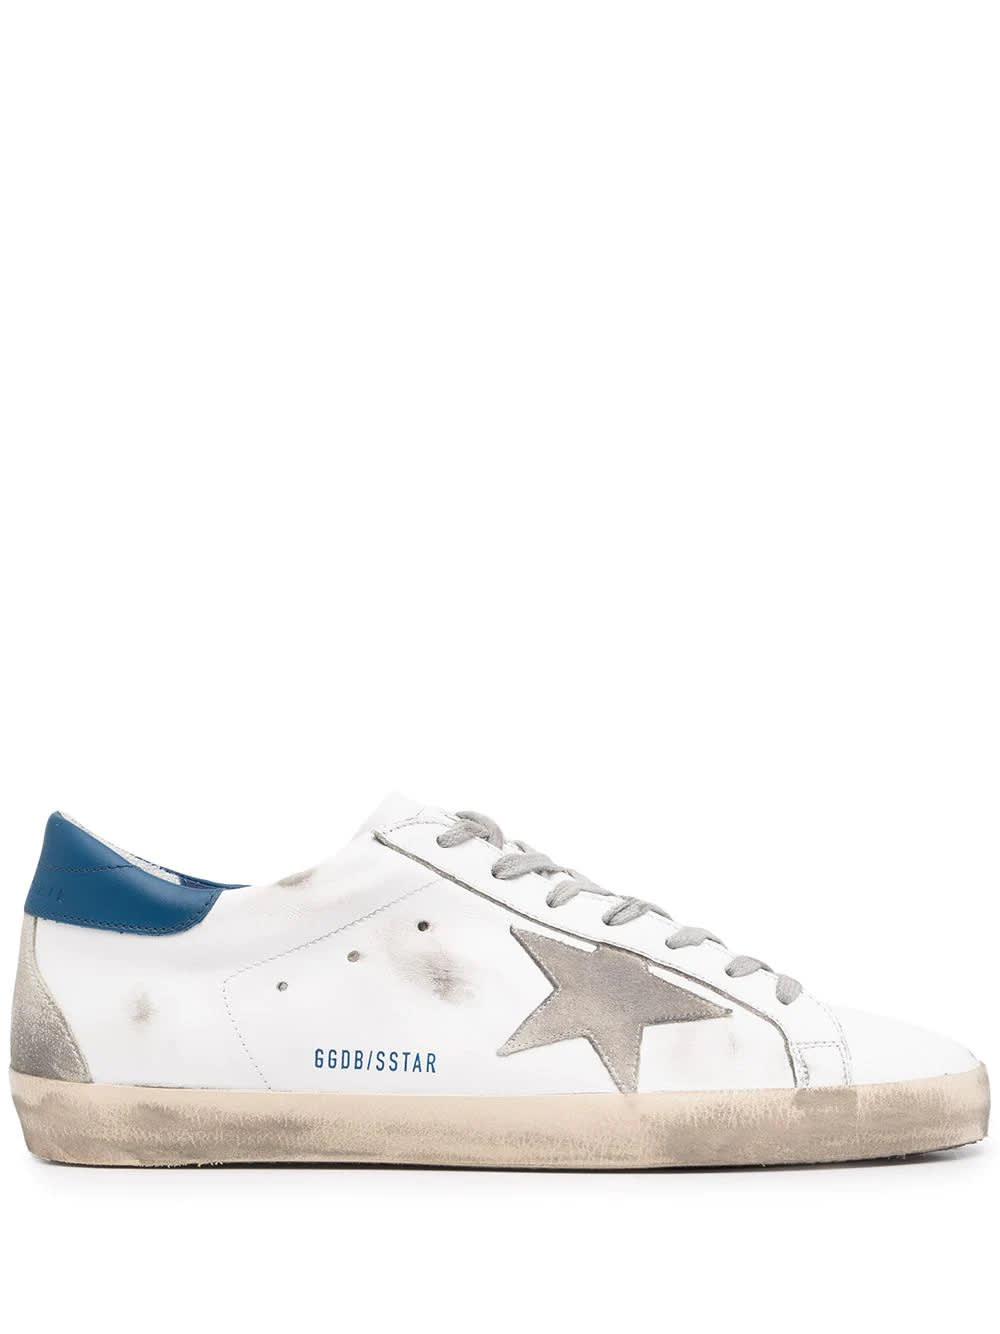 Golden Goose Man White Super-star Sneakers With Blue Spoiler And Suede Star